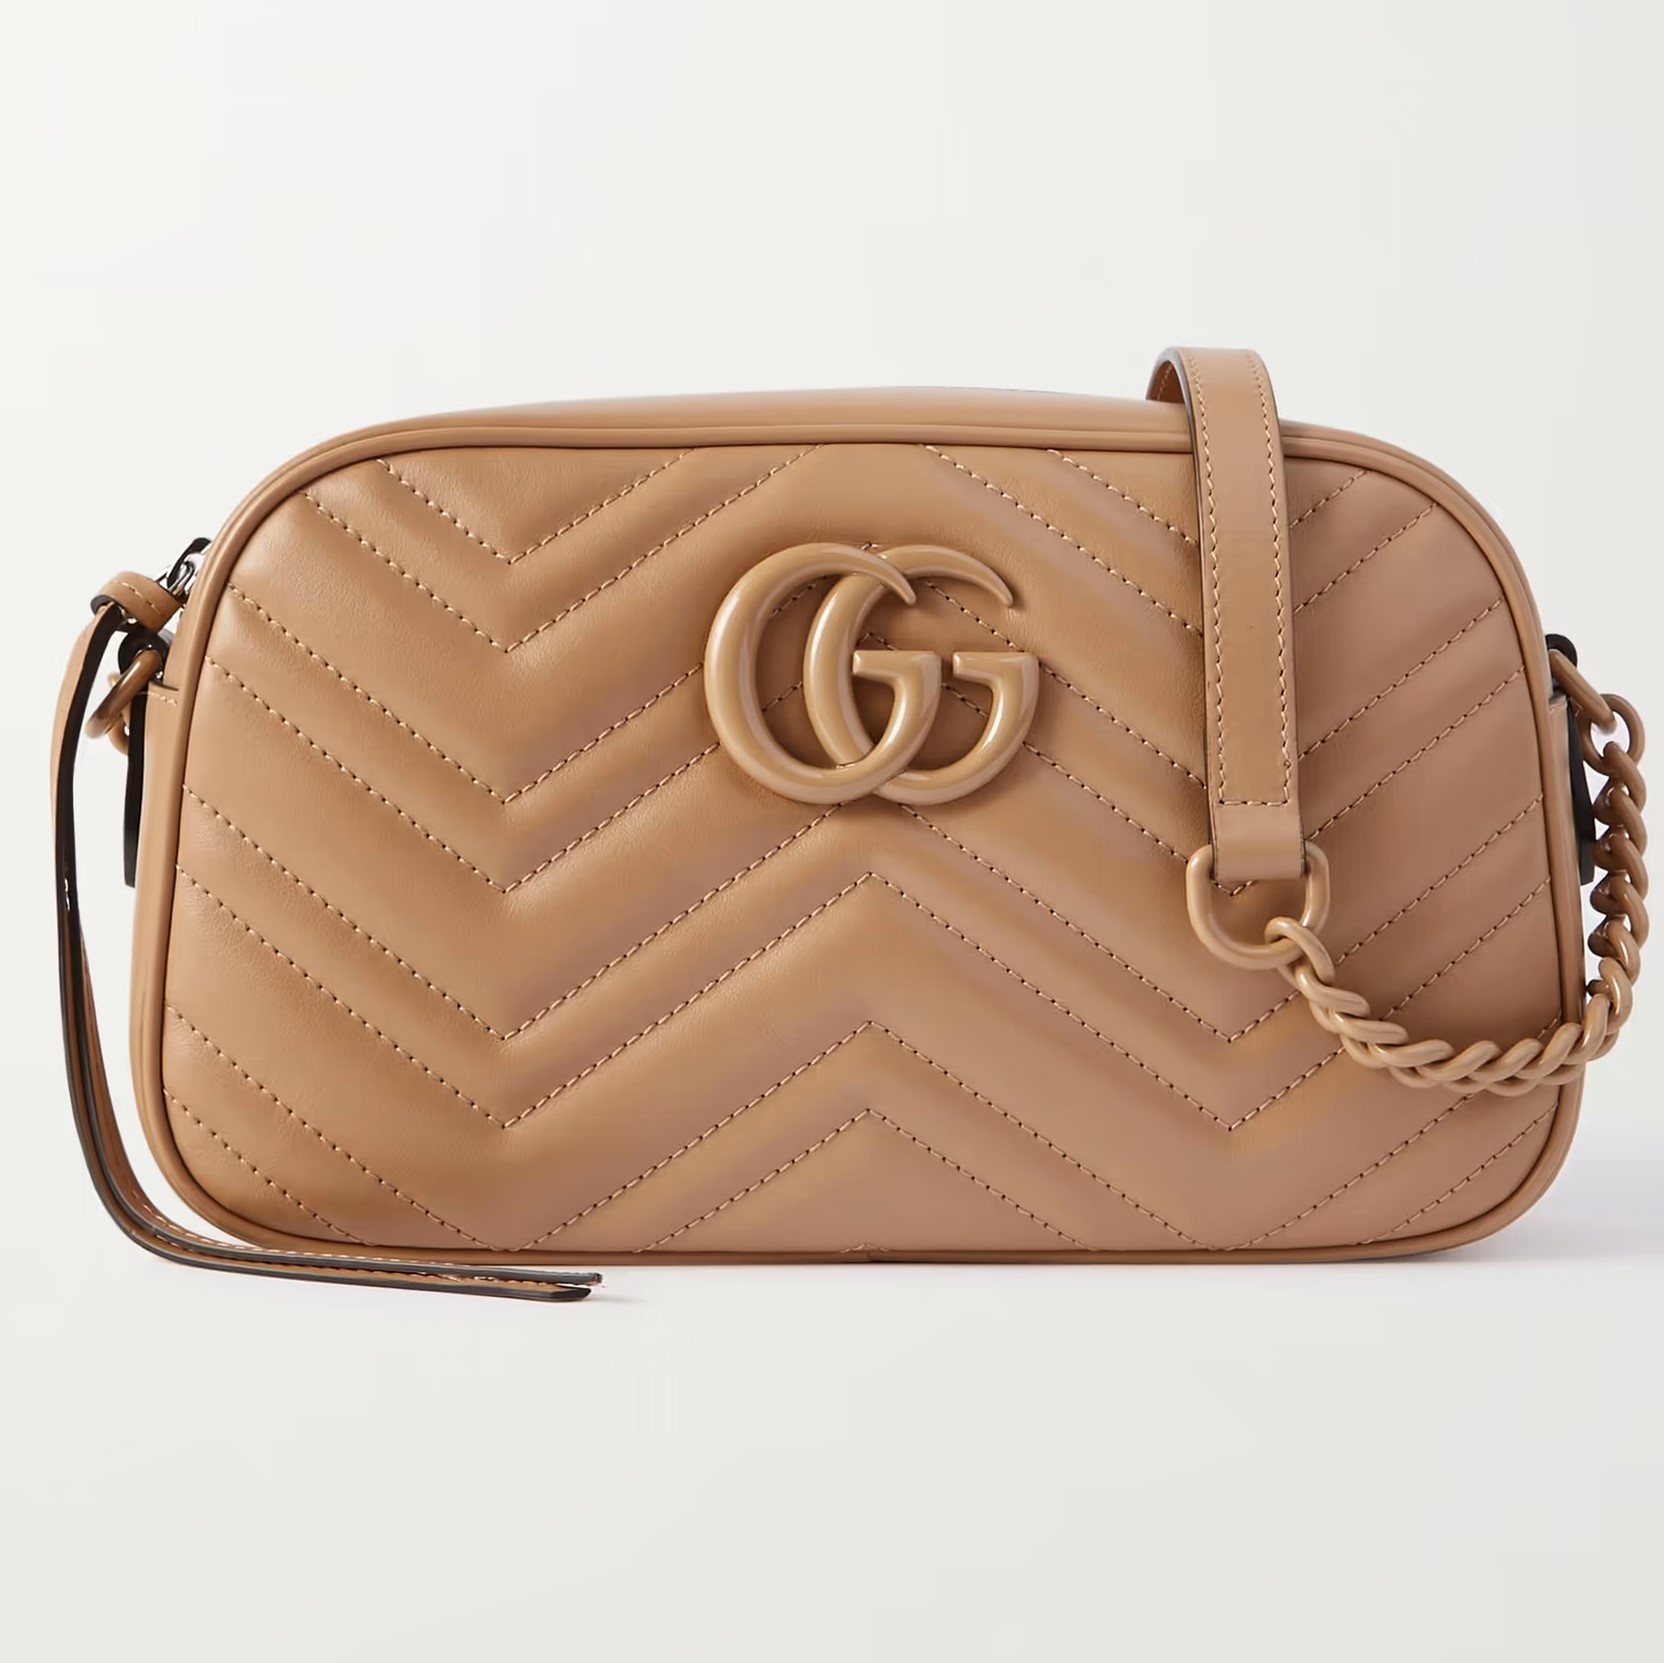 TÚI ĐEO CHÉO GUCCI GG MARMONT ANTIQUE ROSE CAMERA SMALL QUILTED LEATHER SHOULDER BAG 3